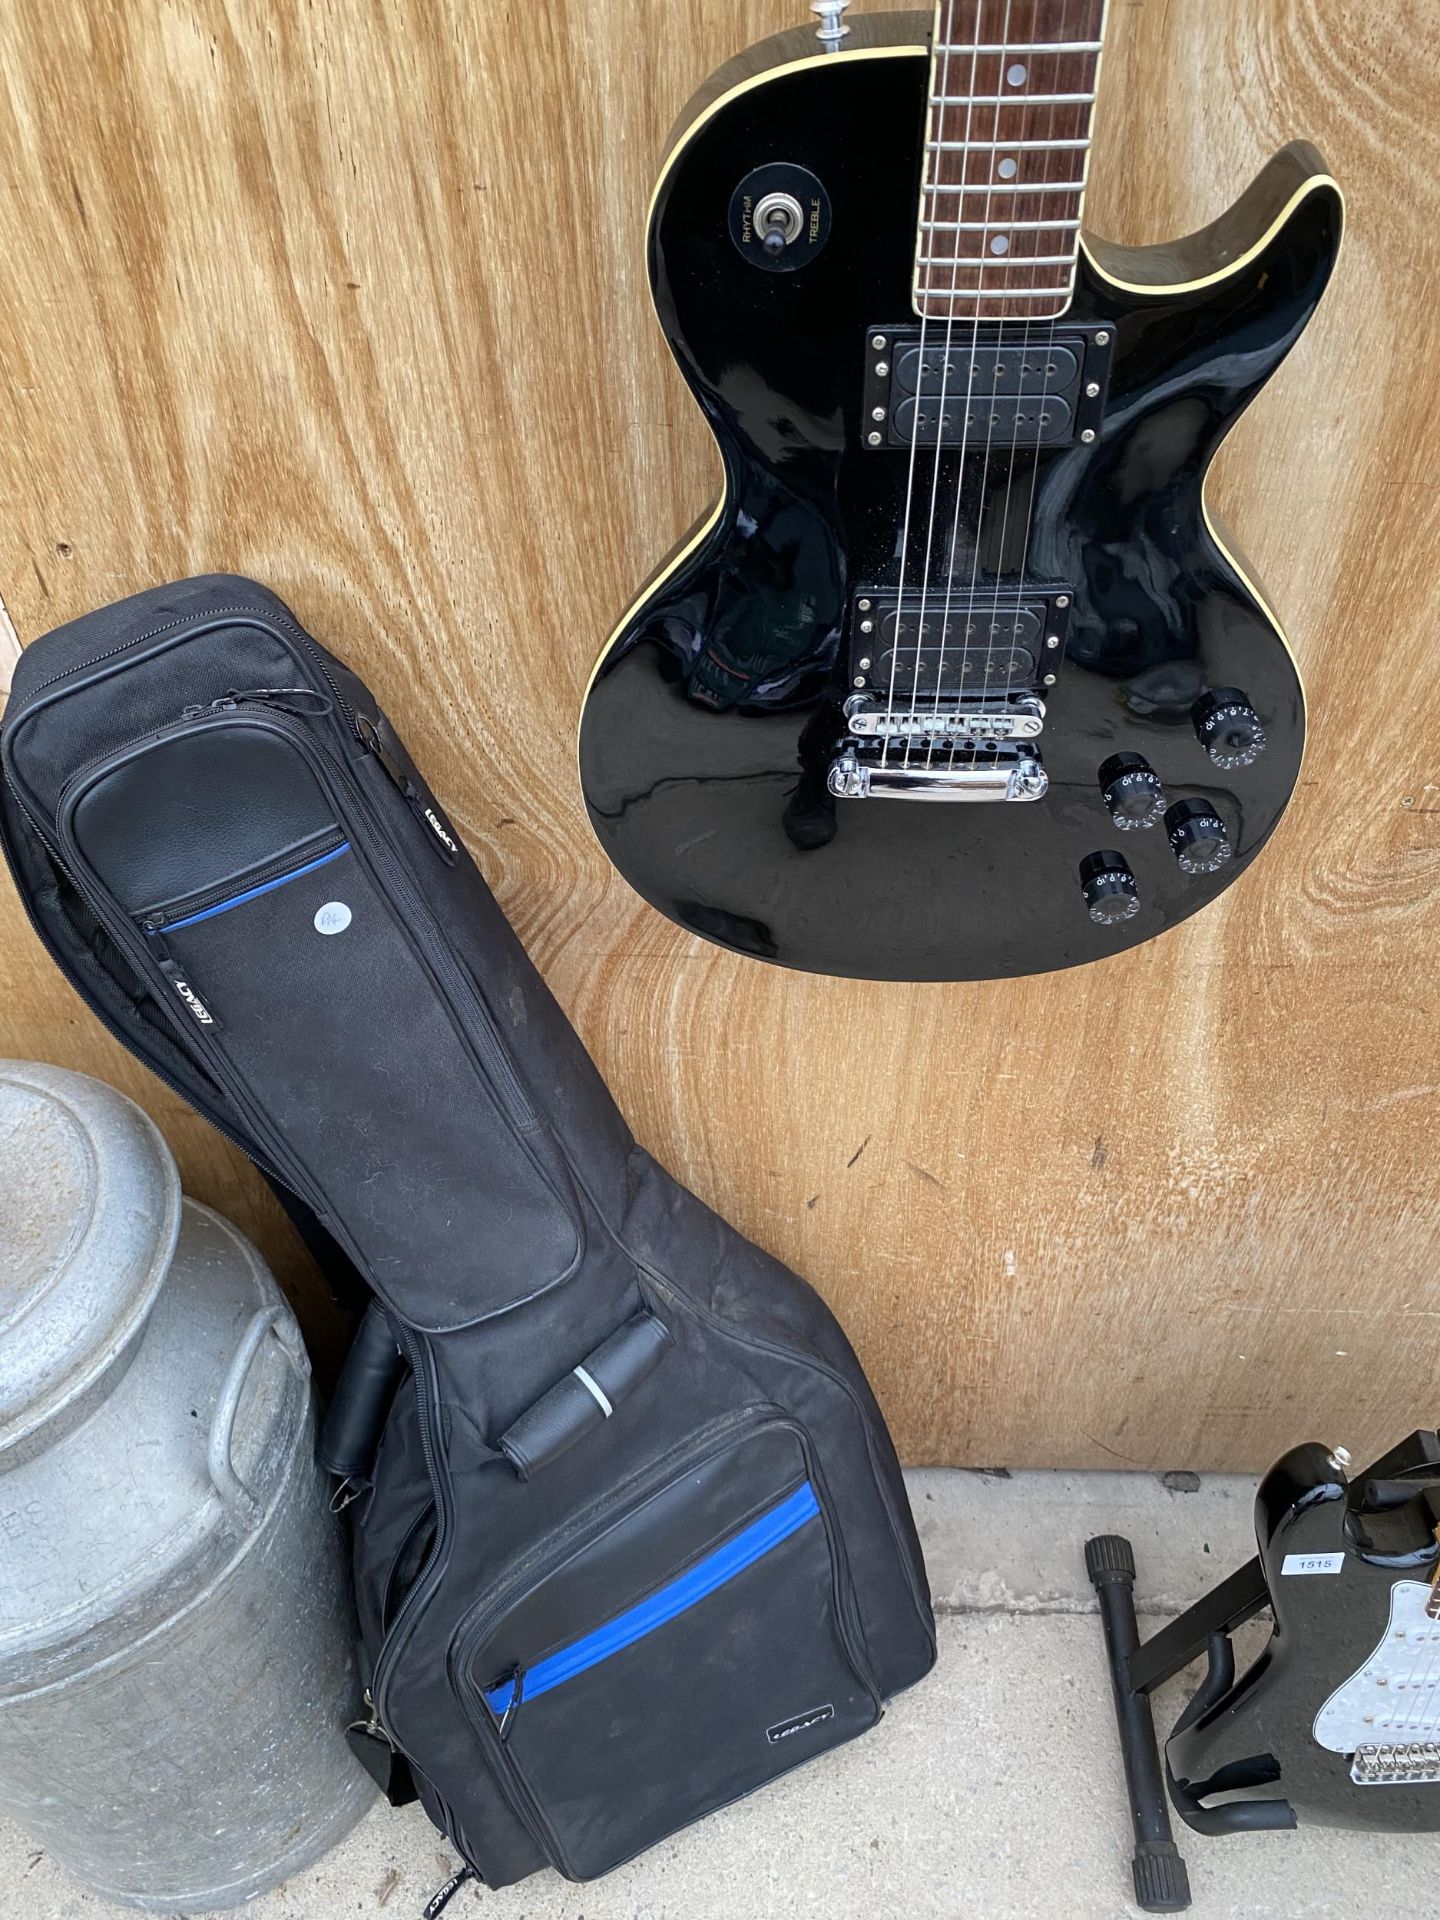 A BLACK TANGLEWOOD GUITAR COMPANY ELECTRIC GUITAR WITH A CARRY CASE, MADE IN JAPAN - Image 2 of 6